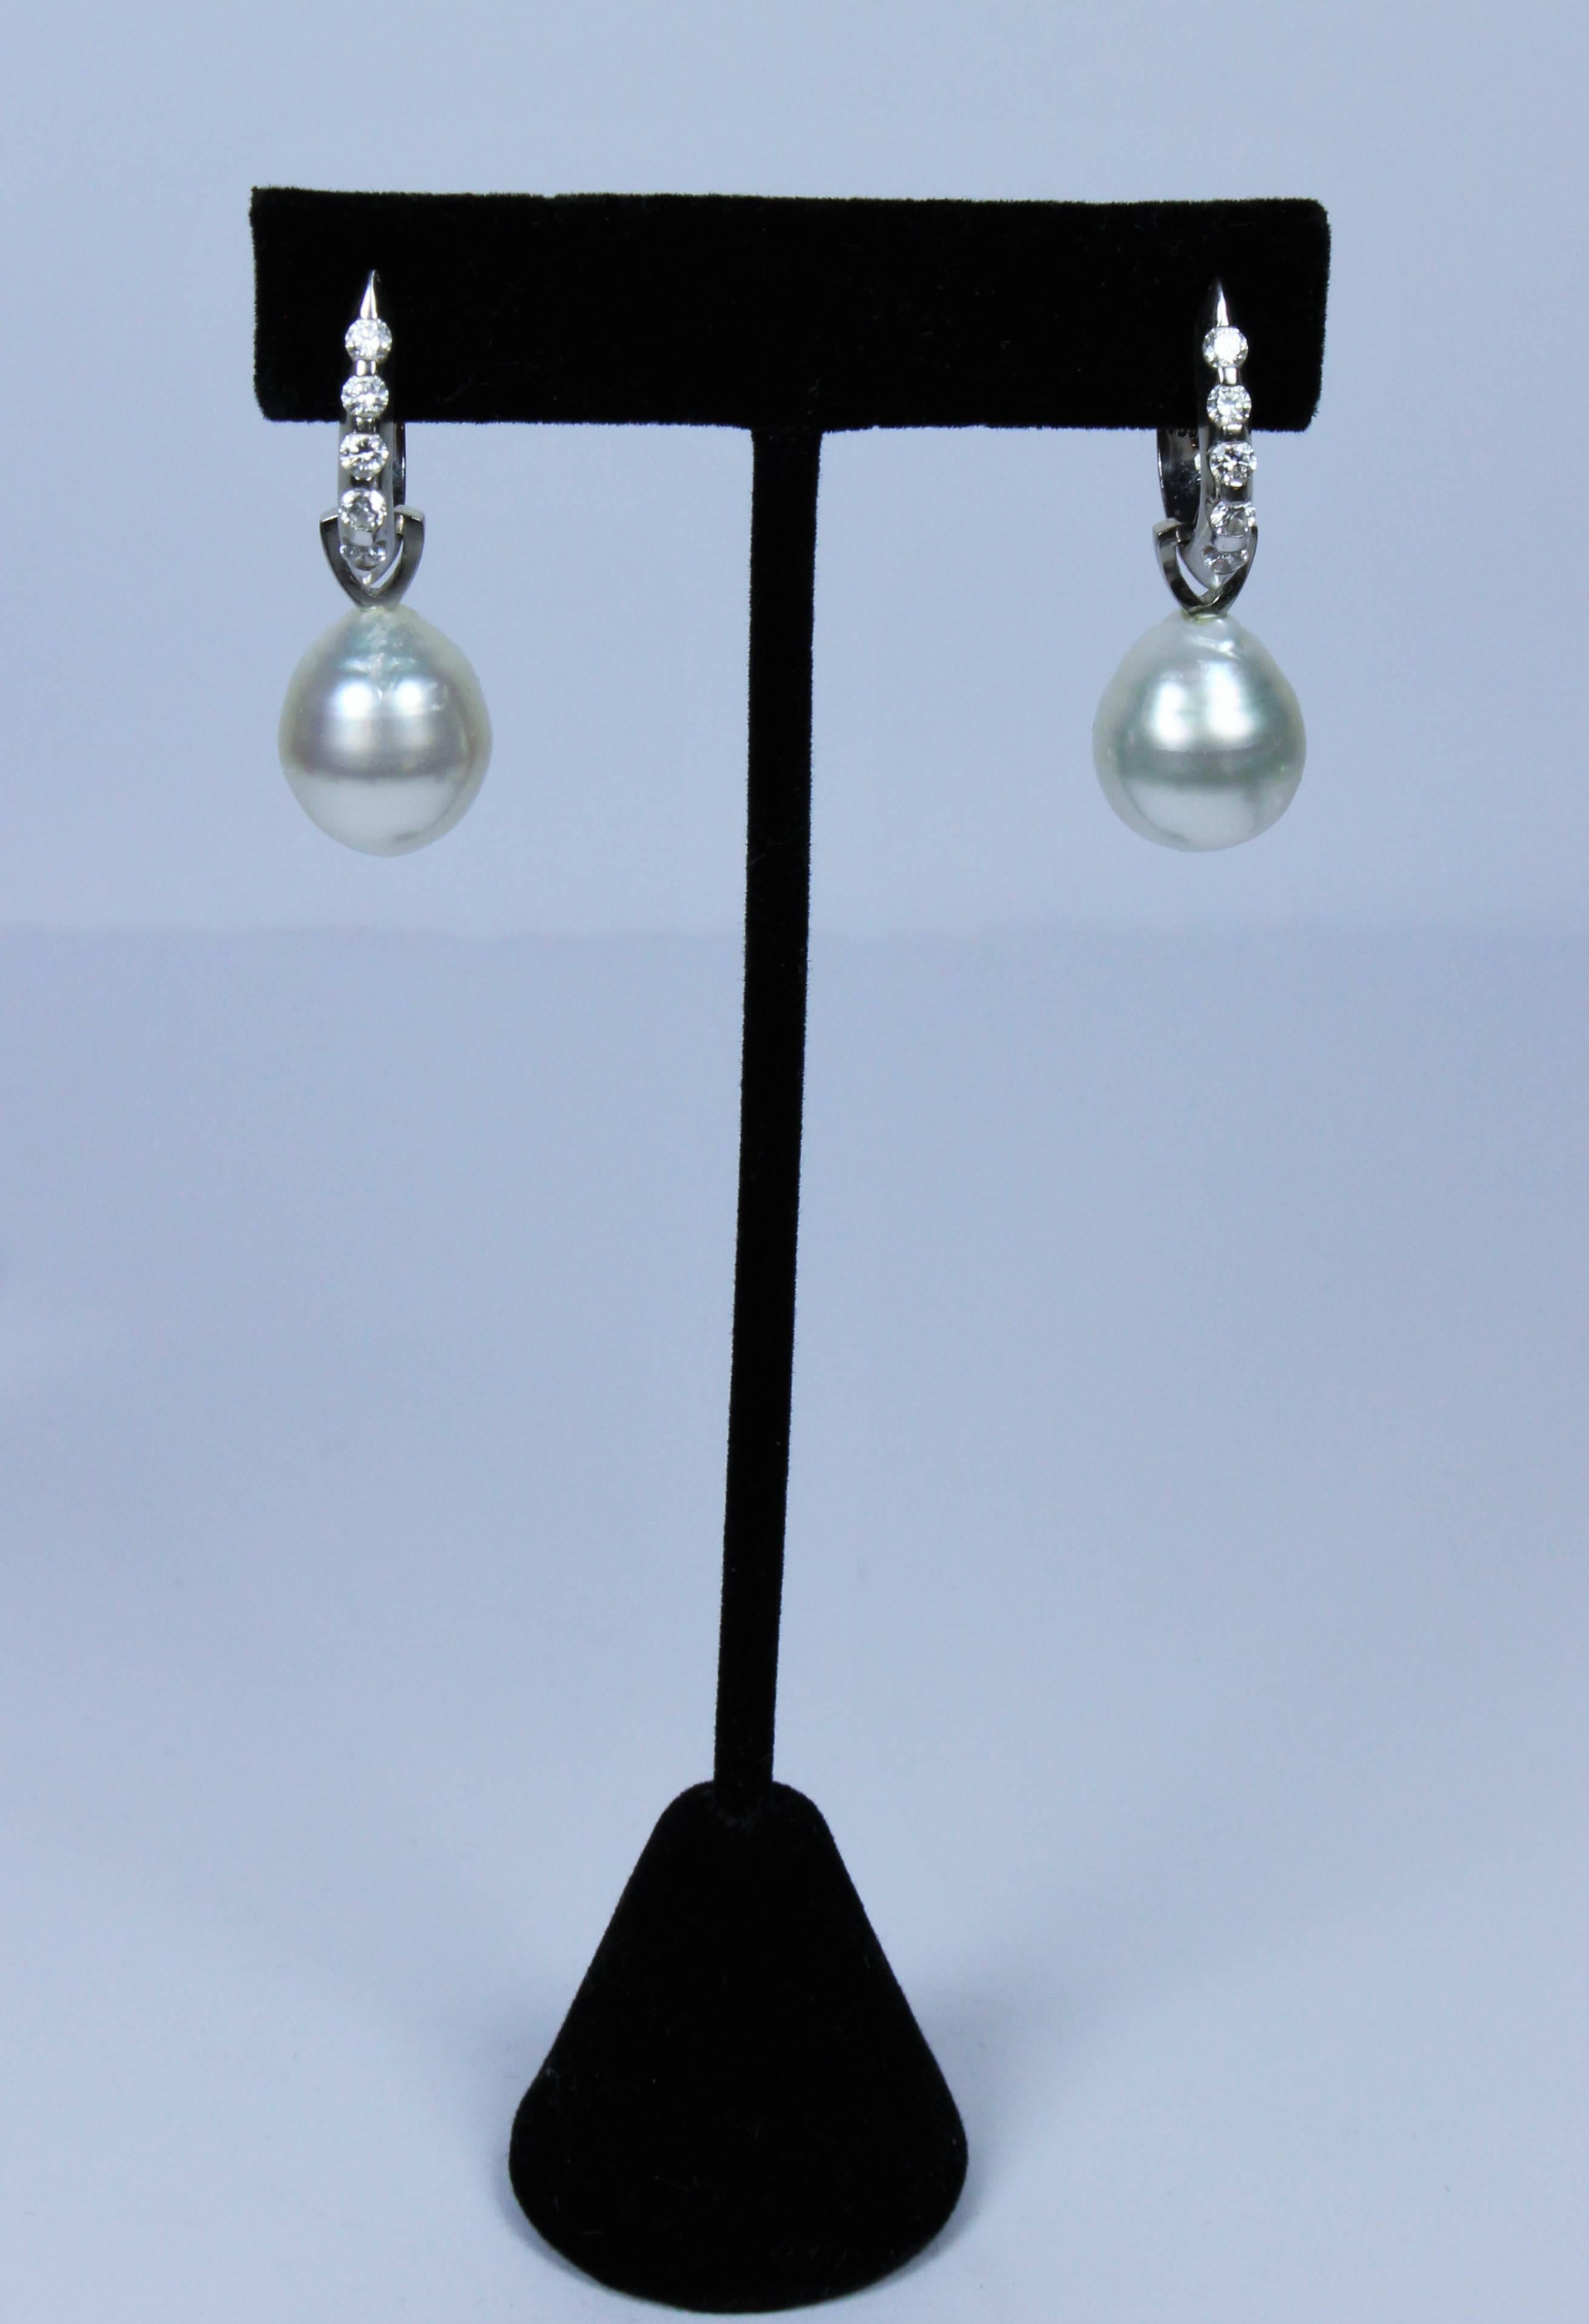 These earrings composed of a 18kt white gold and feature diamond accents (with an approximate total weight of .08) on the front side of the detachable earring. The pearls measure approximately 13mm each. In excellent vintage condition.

Length: 1